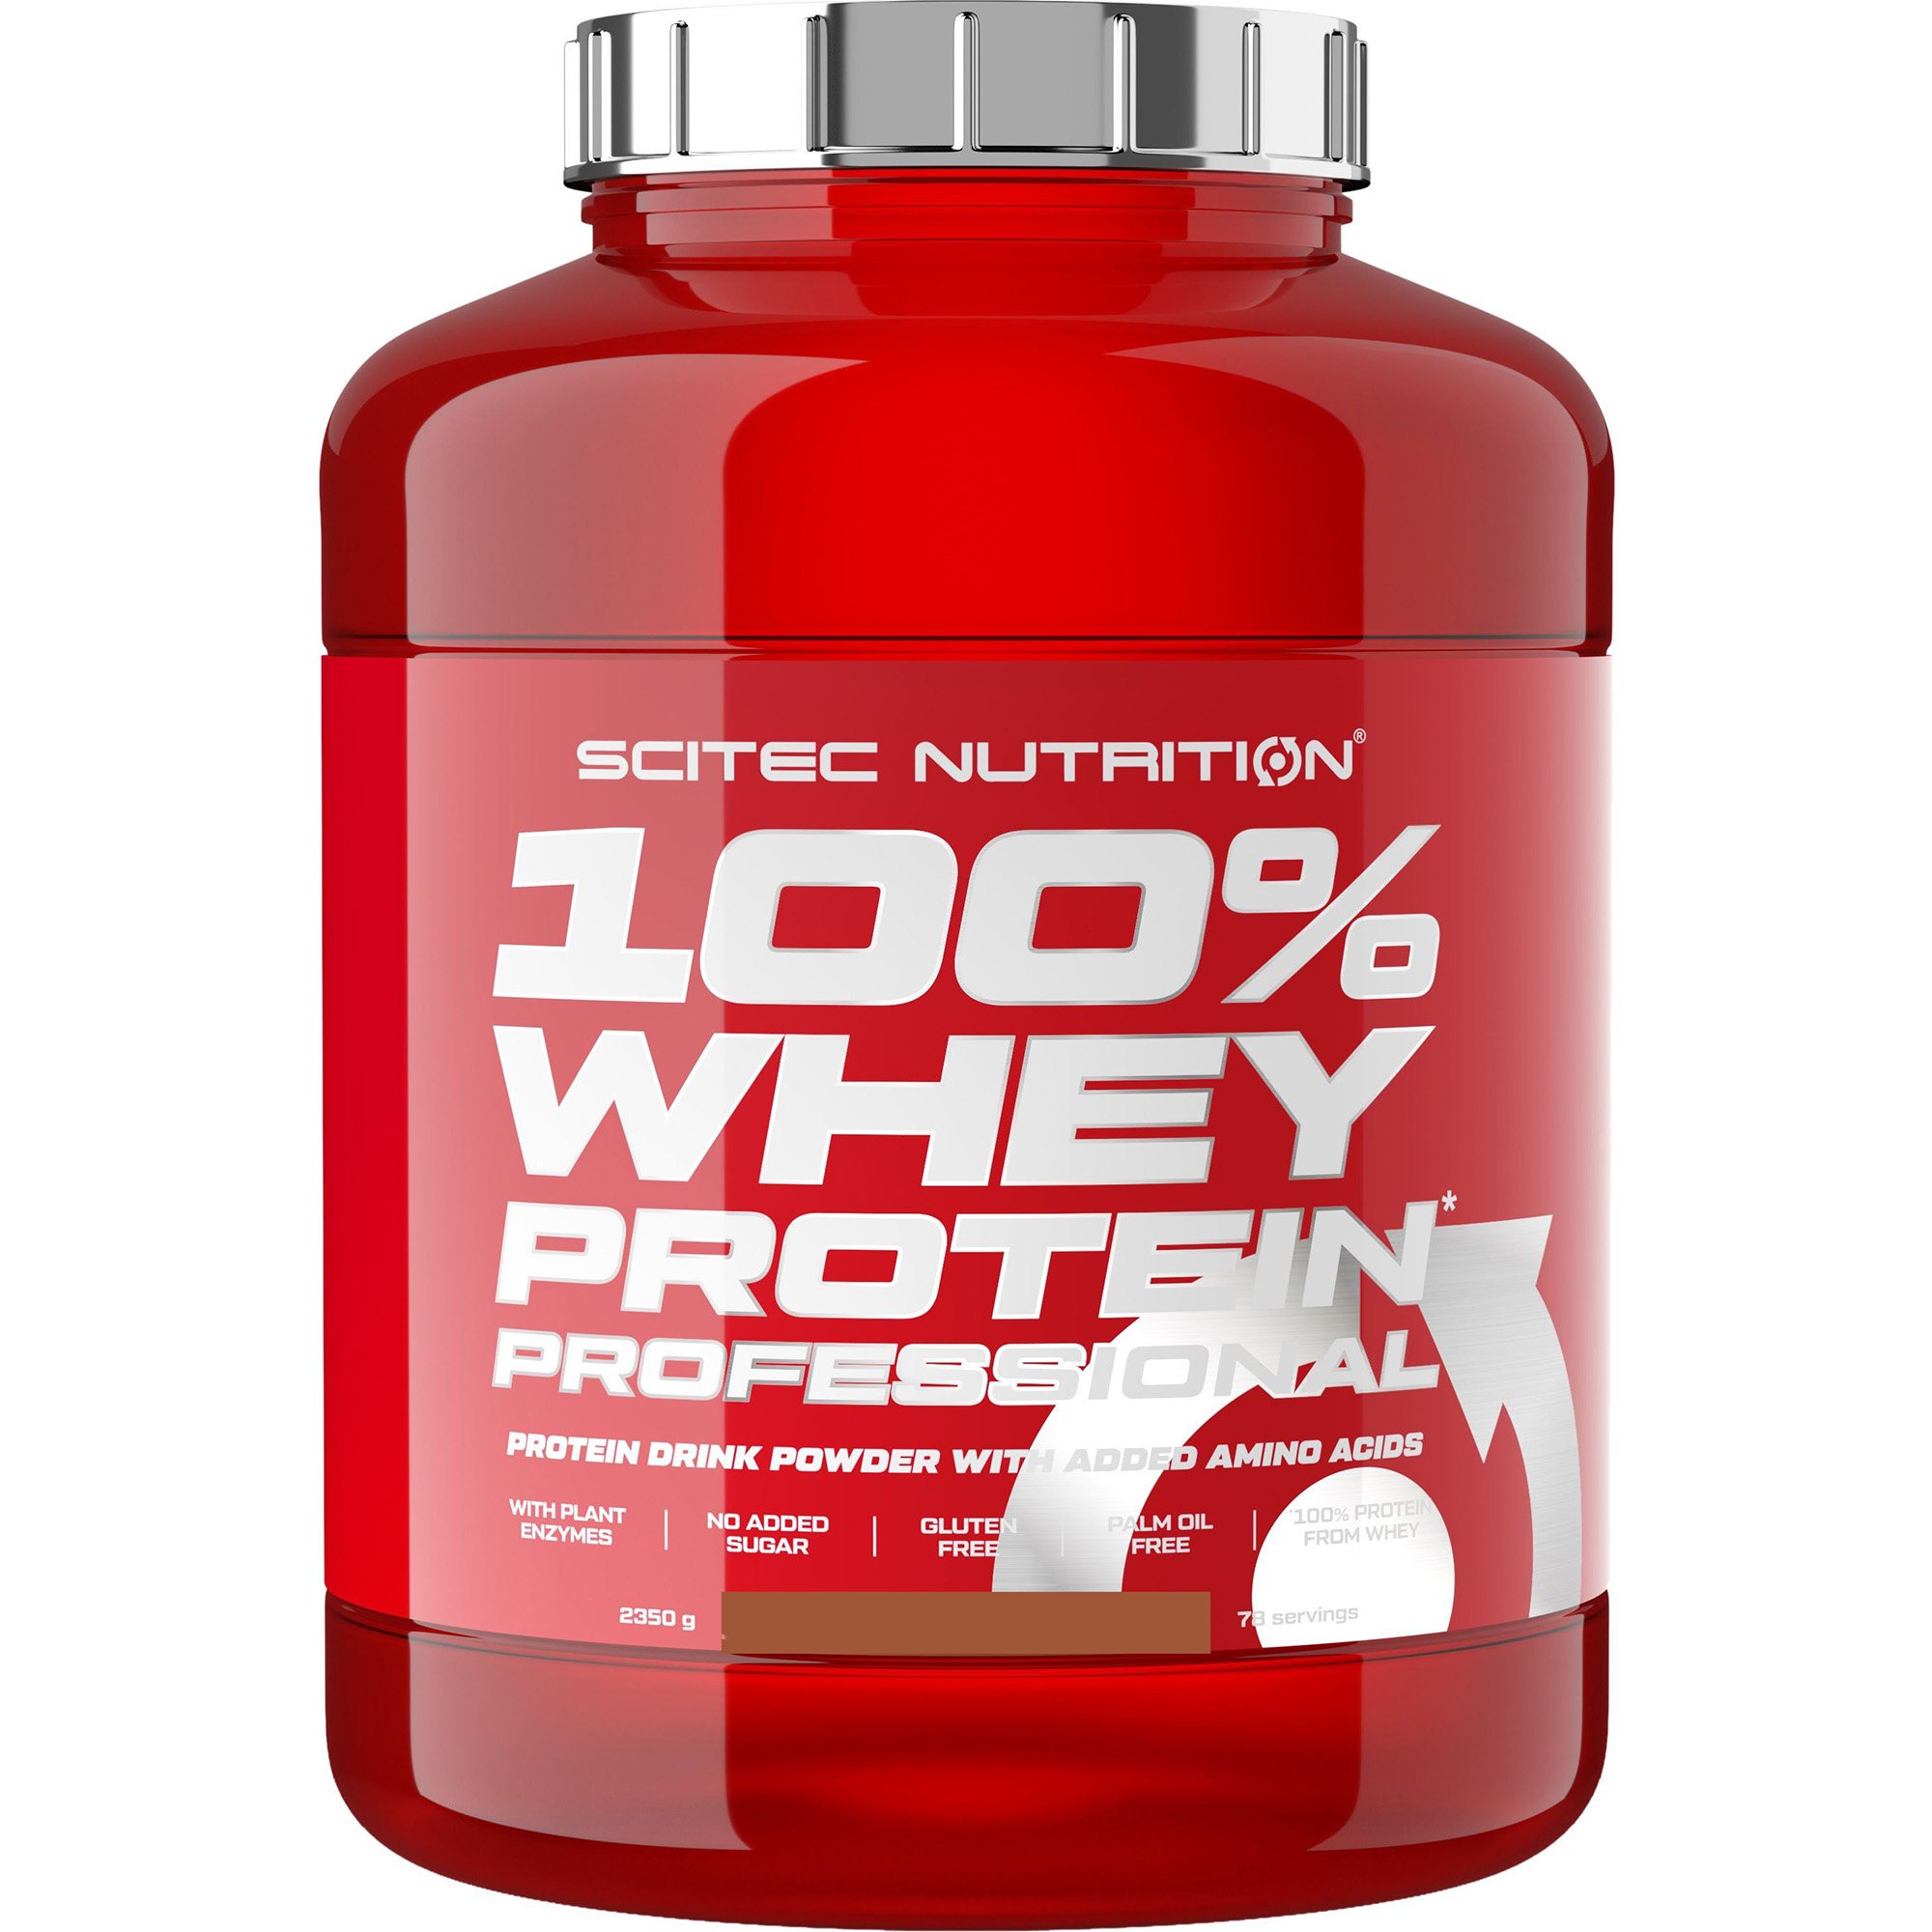 Протеин Scitec Nutrition Whey Protein Professional Peanut Butter 2.35 кг - фото 1